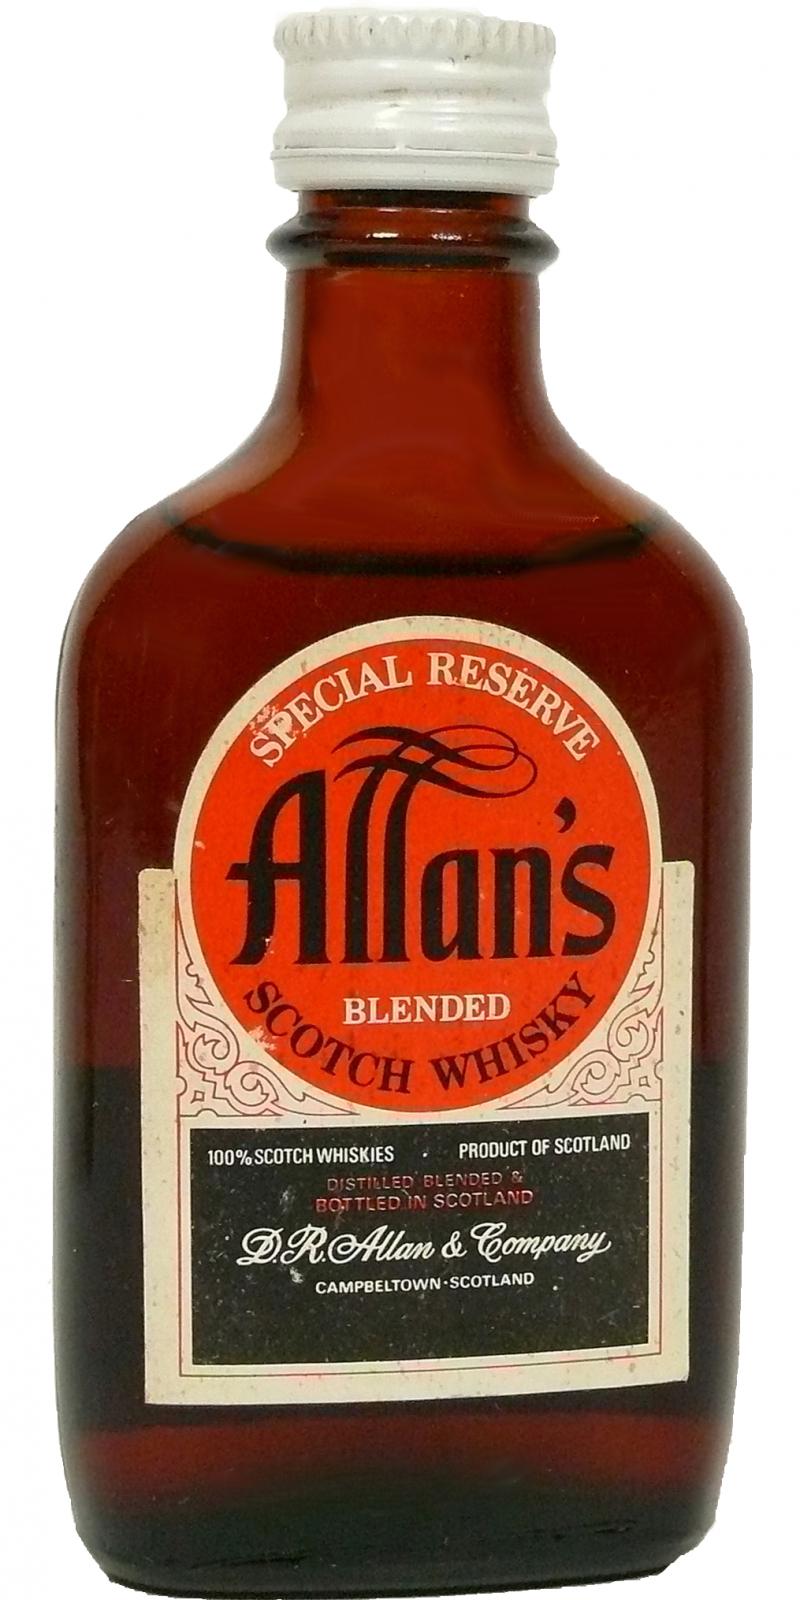 Allan's Special Reserve - Blended Scotch Whisky